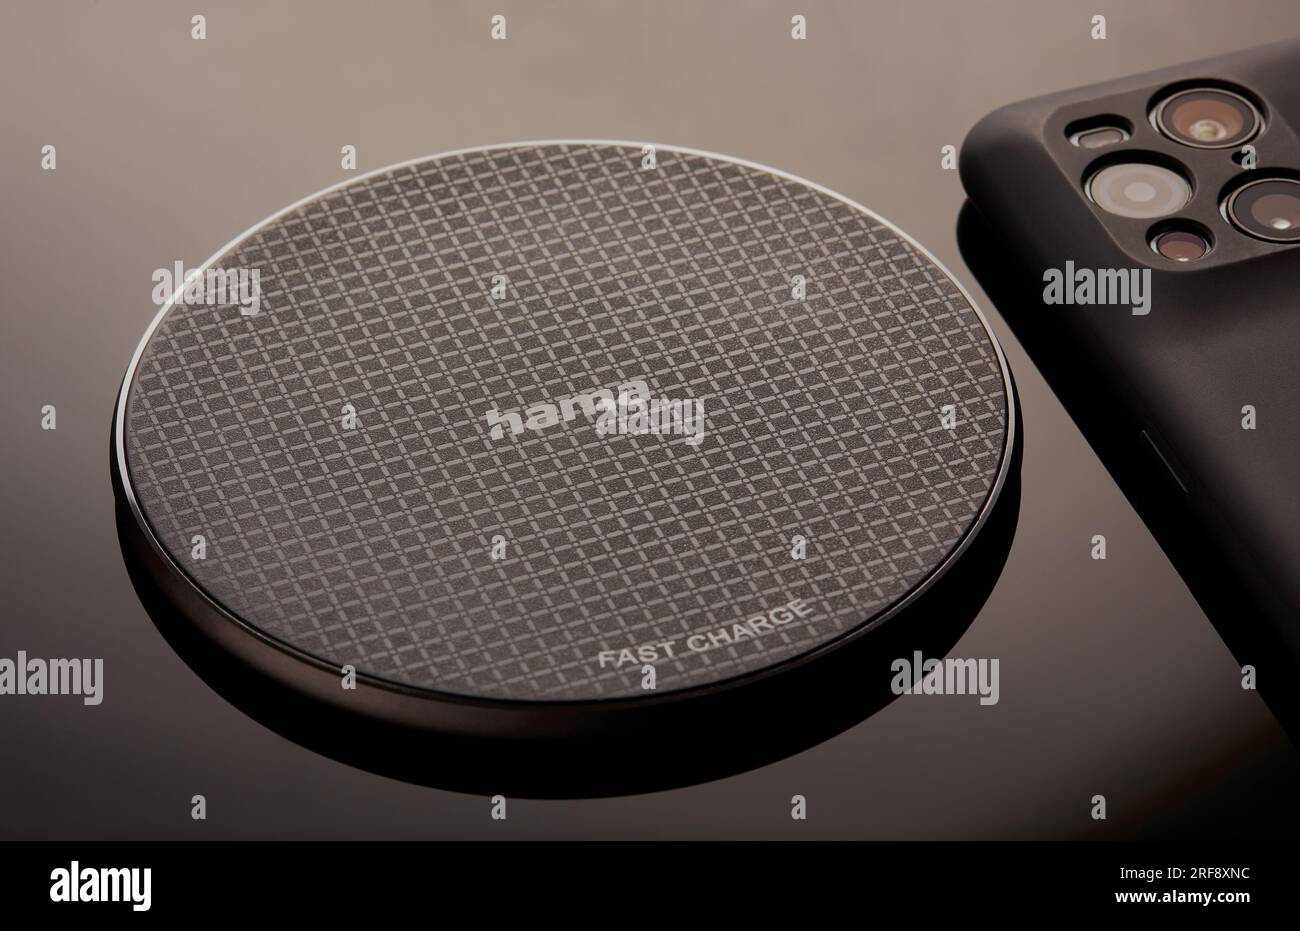 Mansfield,Nottingham,United Kingdom,1st August 2023:Studio product image of a Hama wireless charger,Hama is a company based in Germany. Stock Photo